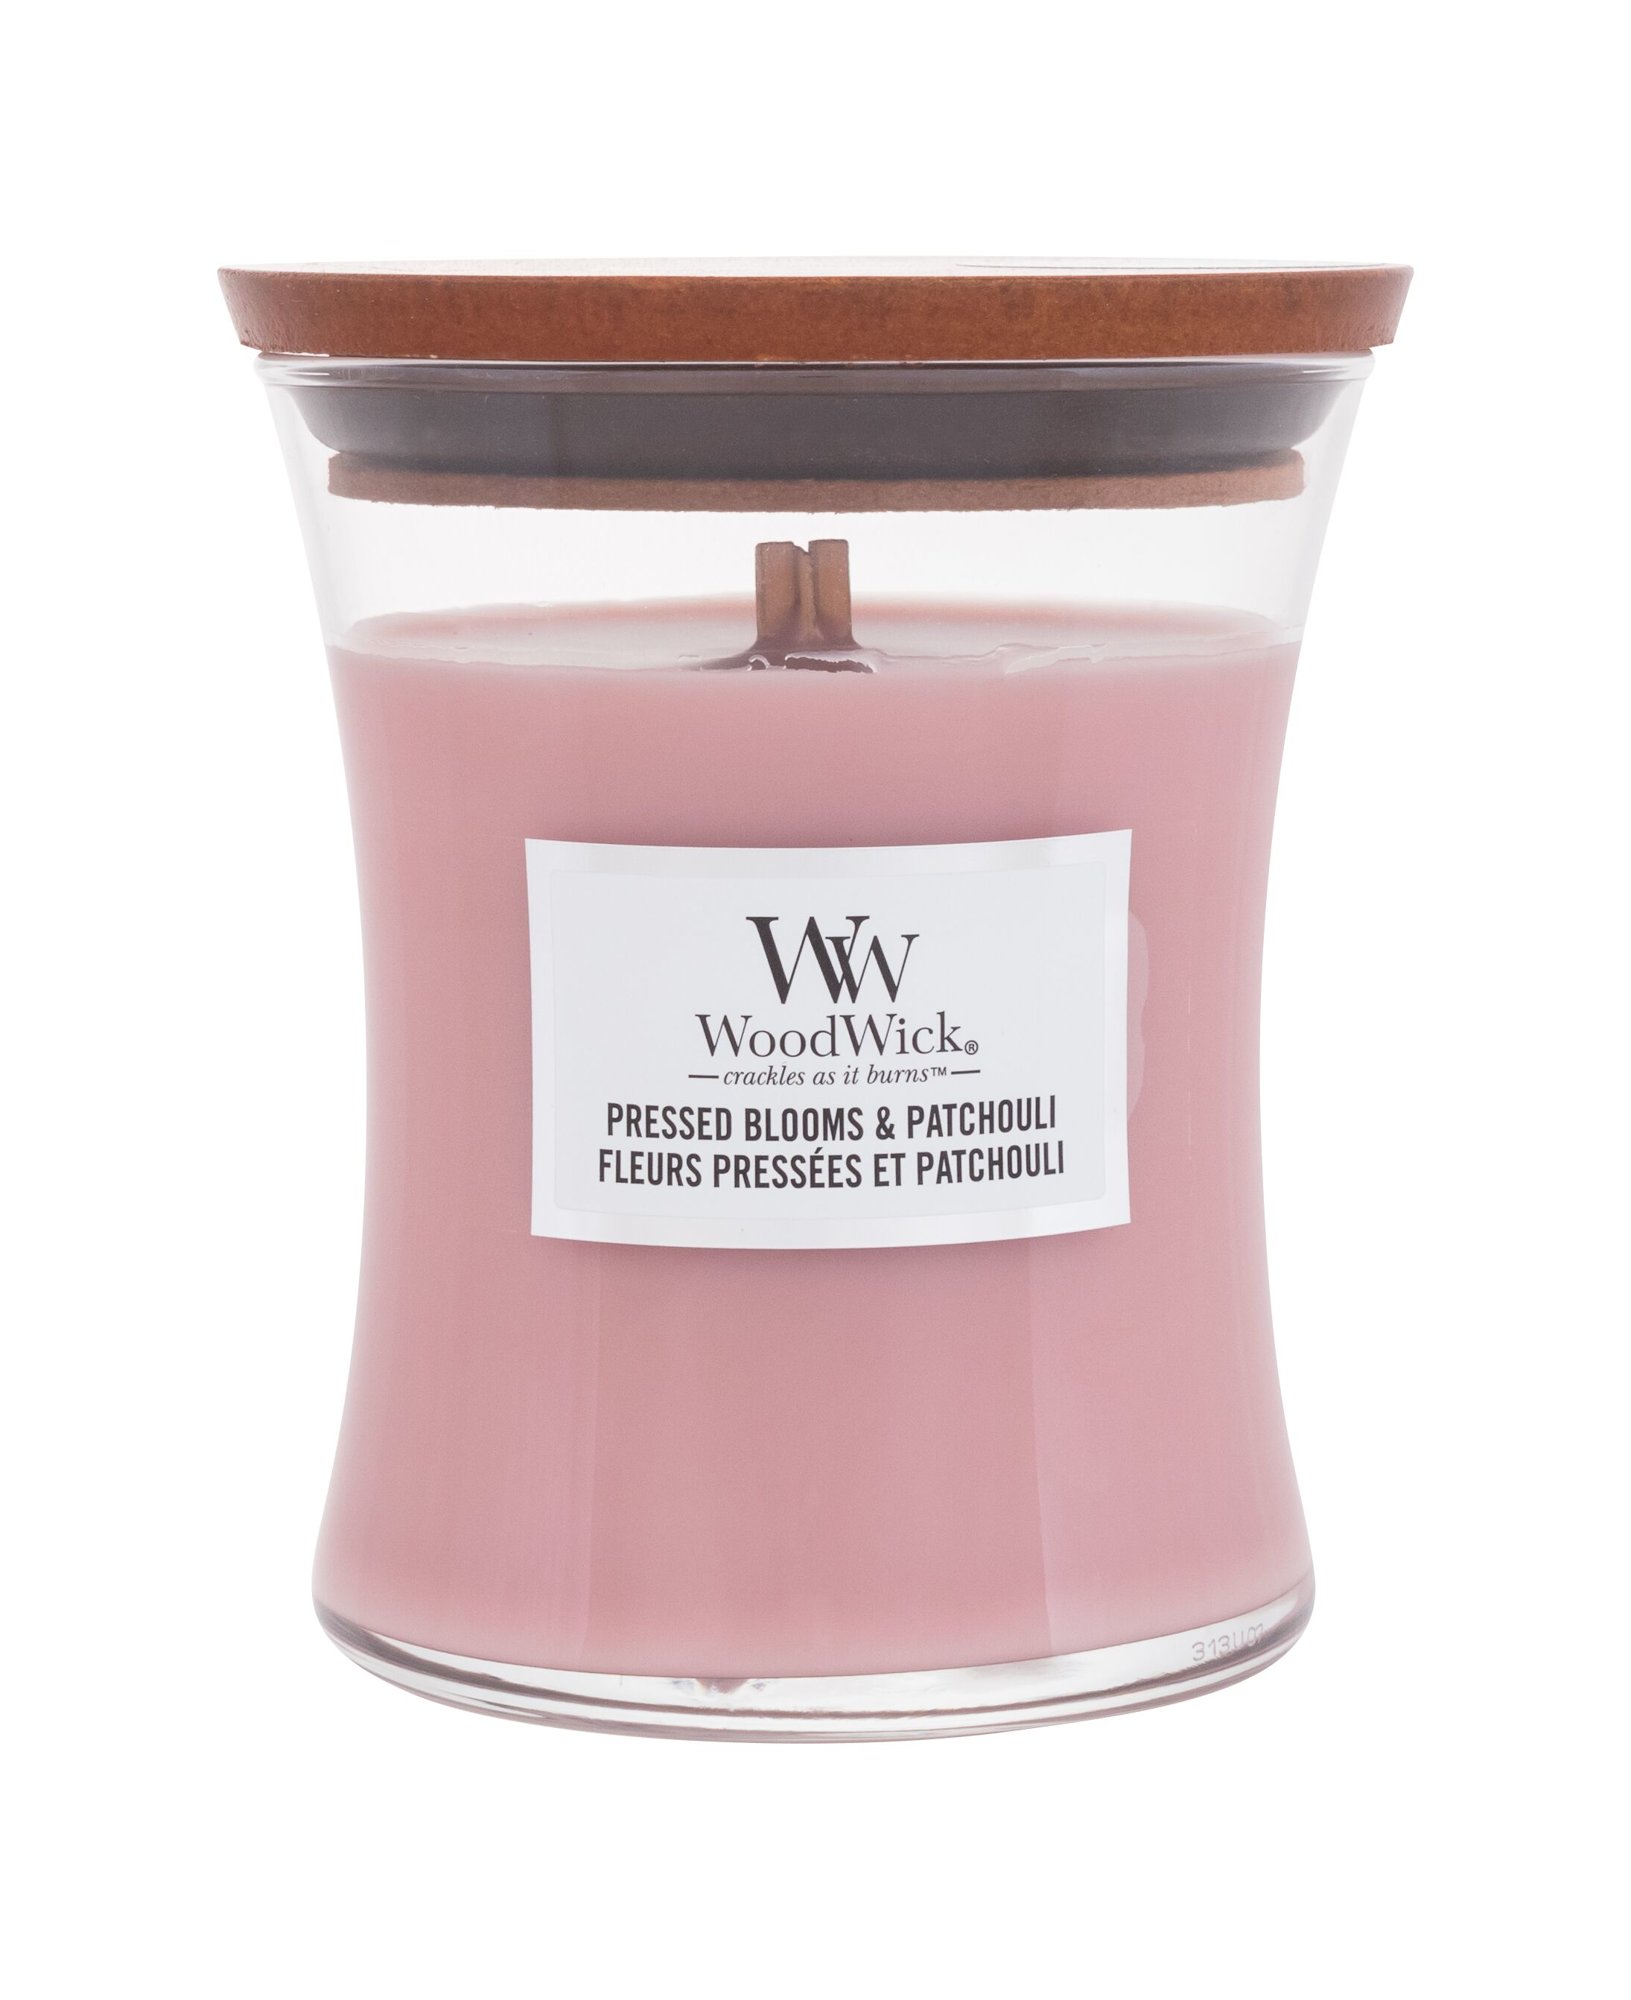 WoodWick Pressed Blooms & Patchouli 275g Kvepalai Unisex Scented Candle